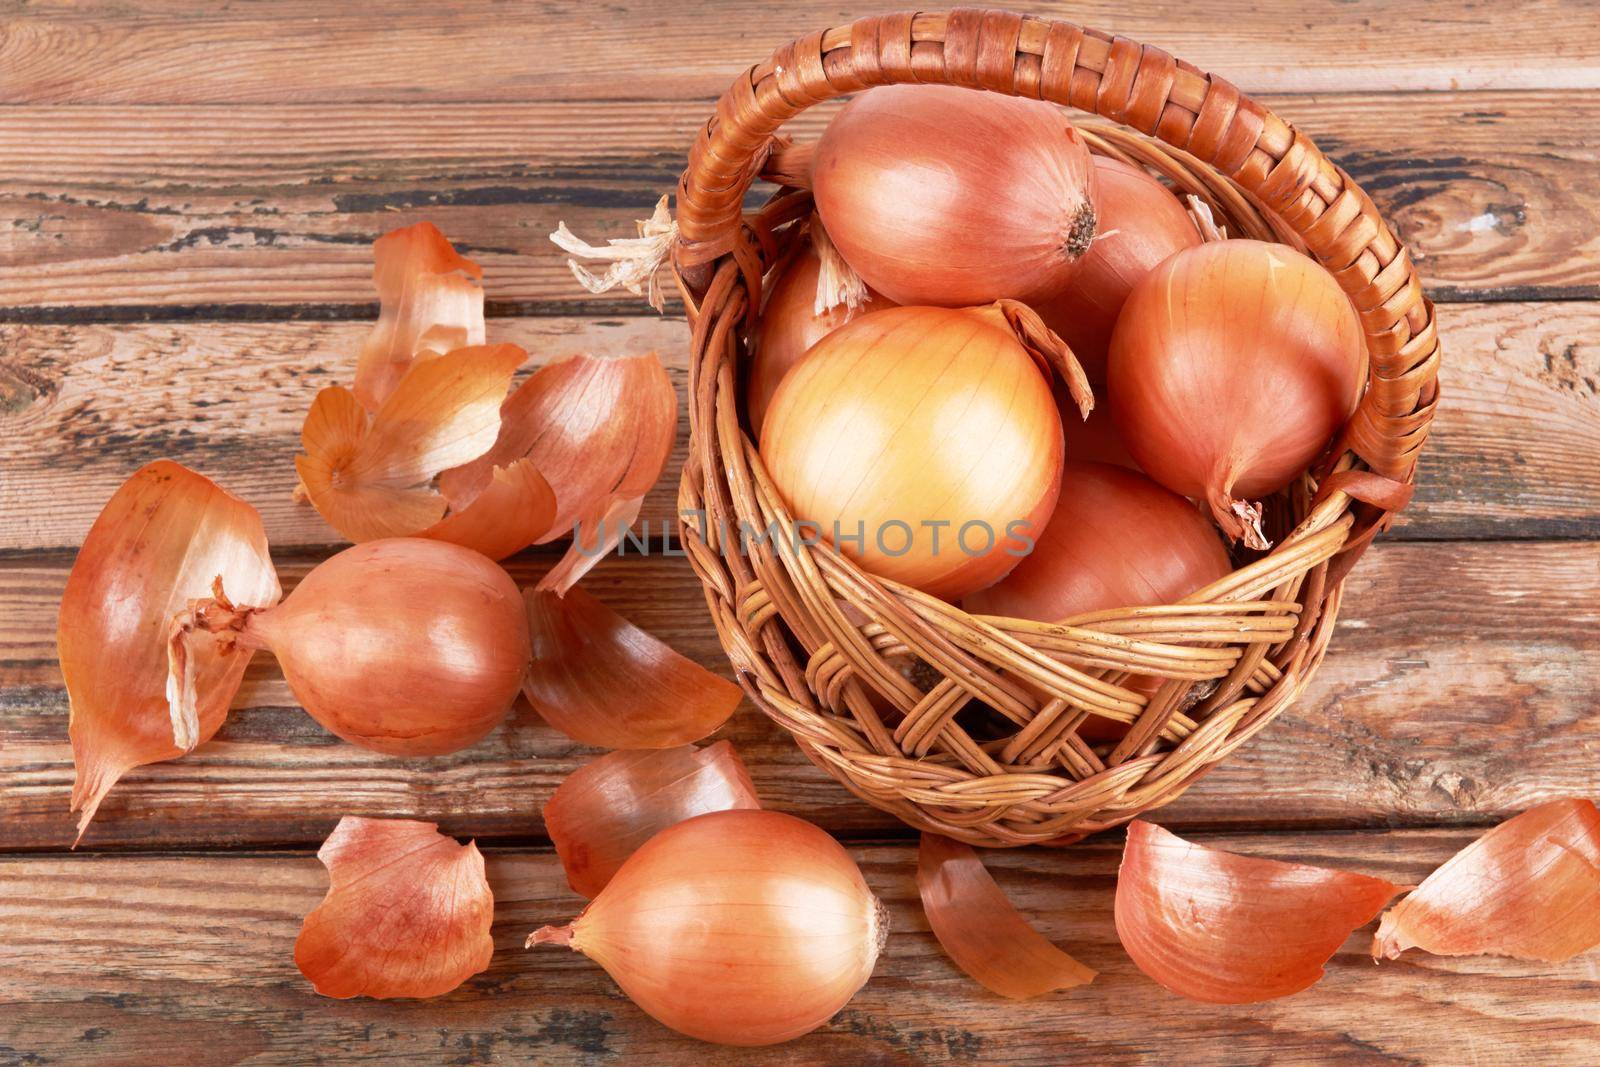 Ripe fresh golden onions on a wooden background